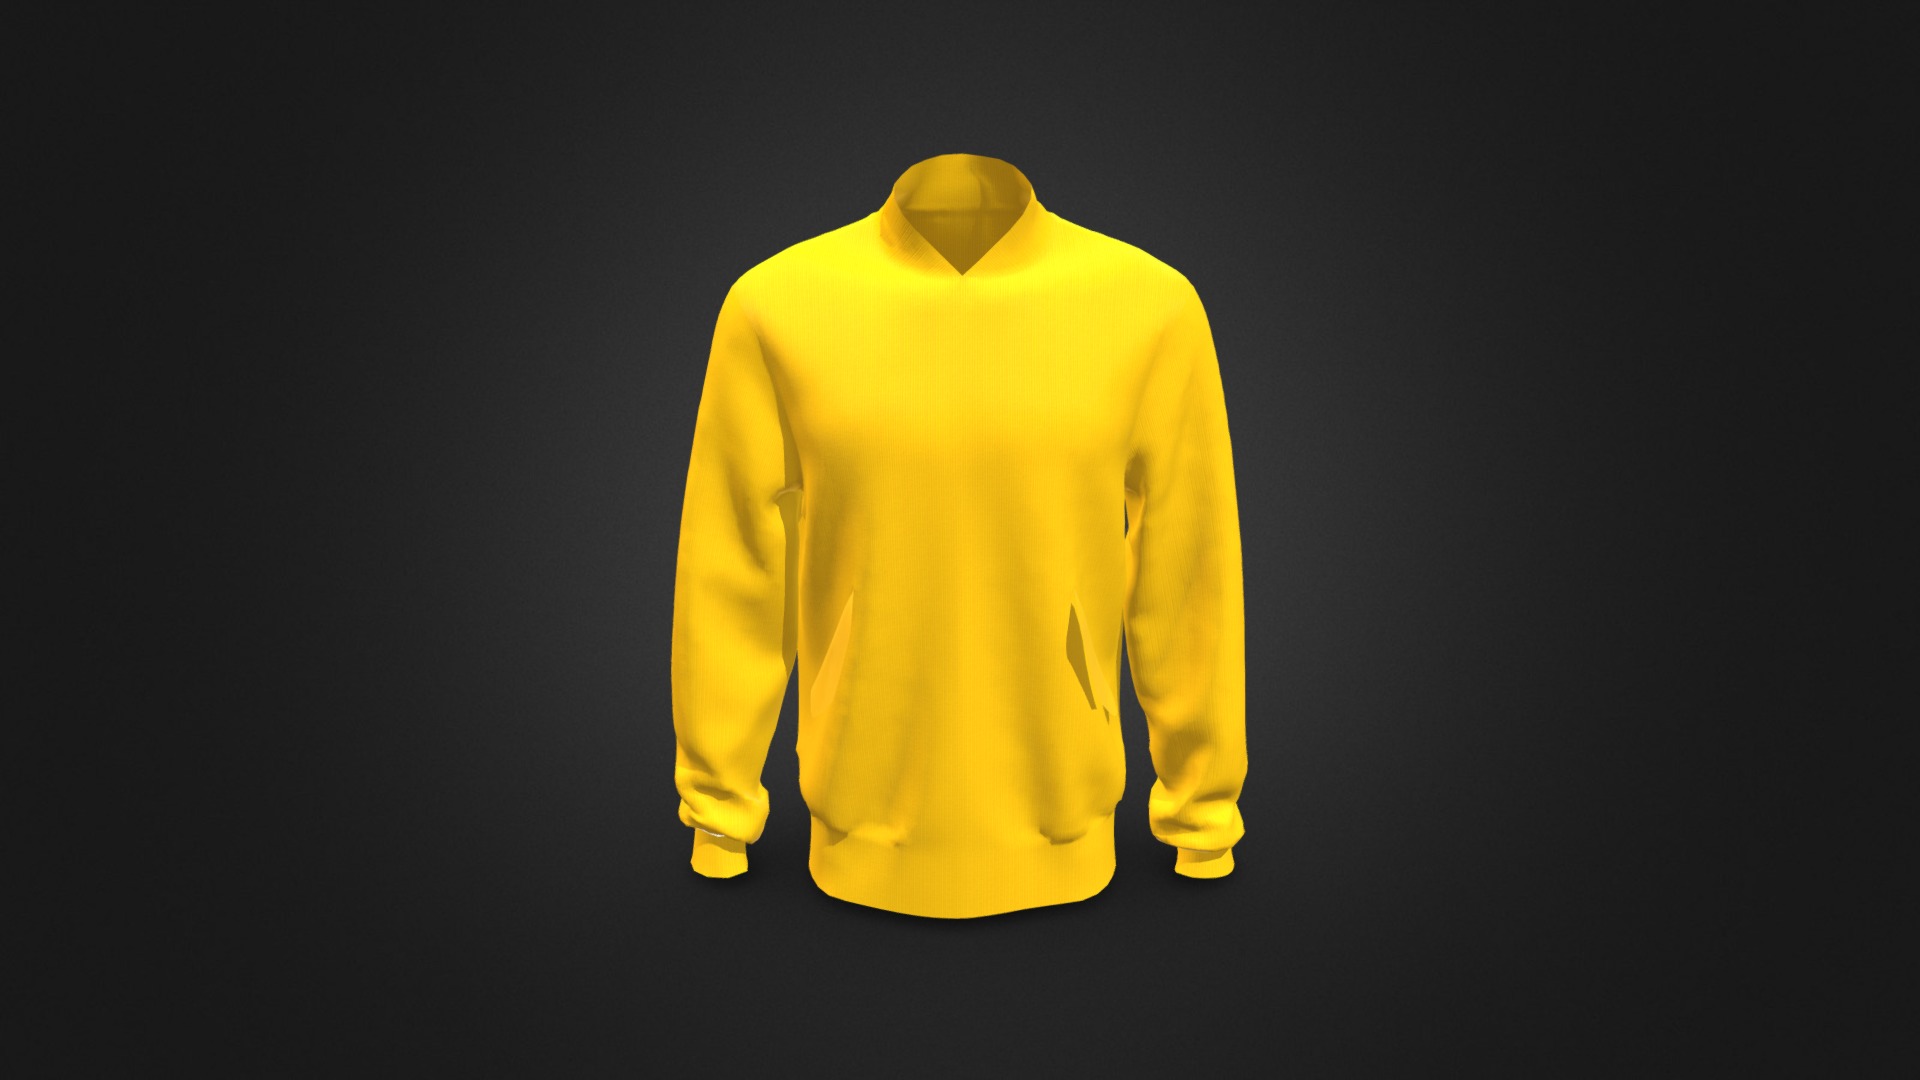 3D model Baseball Jumper - This is a 3D model of the Baseball Jumper. The 3D model is about a yellow jacket with a light on it.